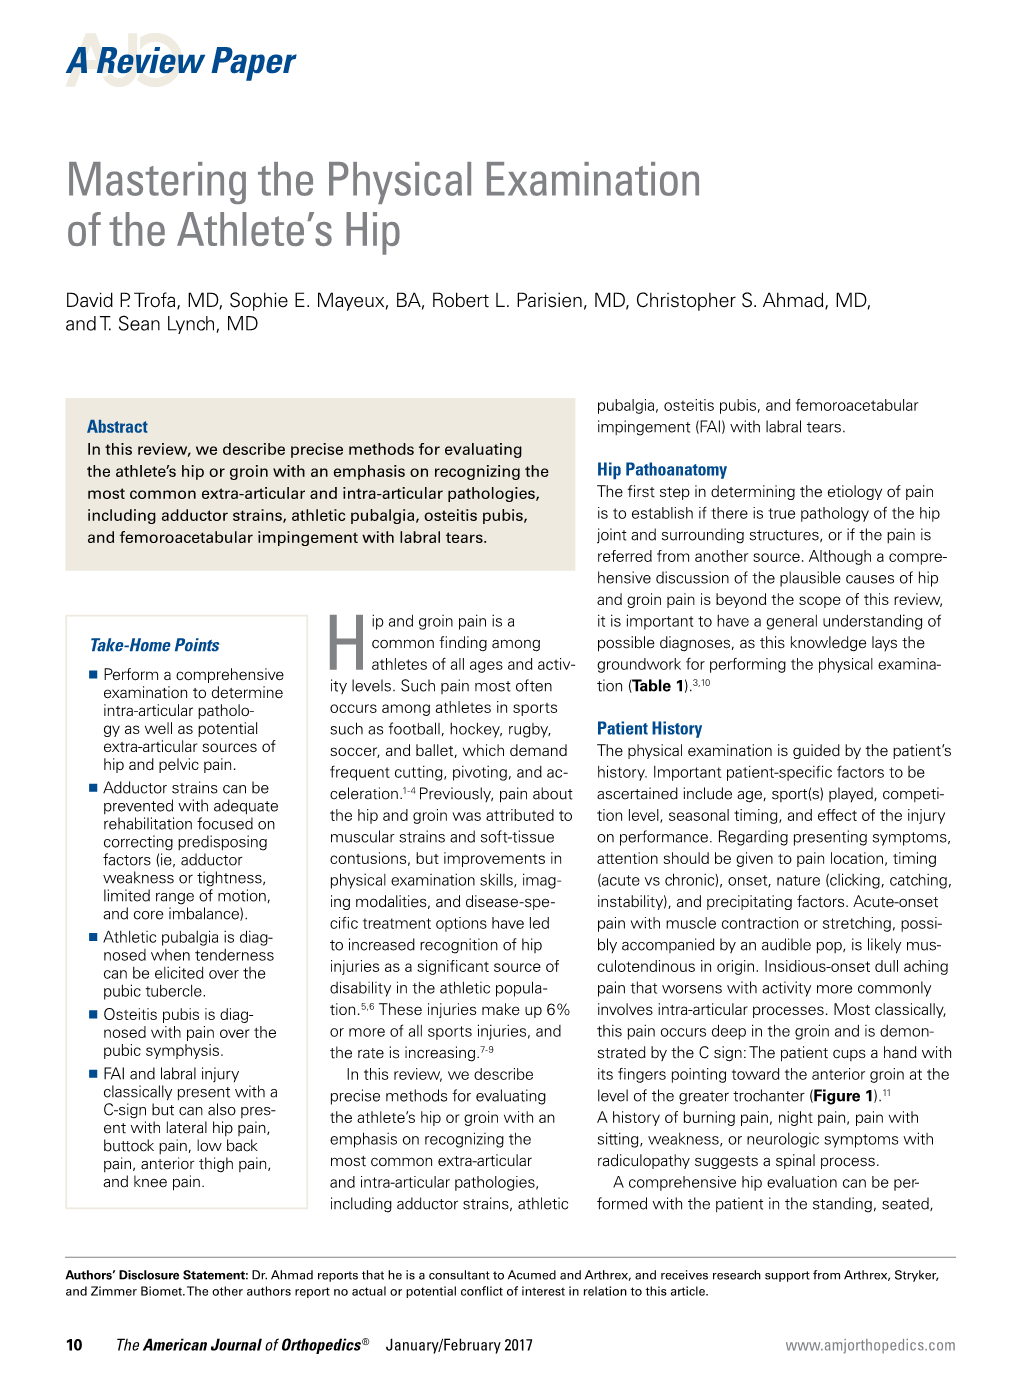 Mastering the Physical Examination of the Athlete's